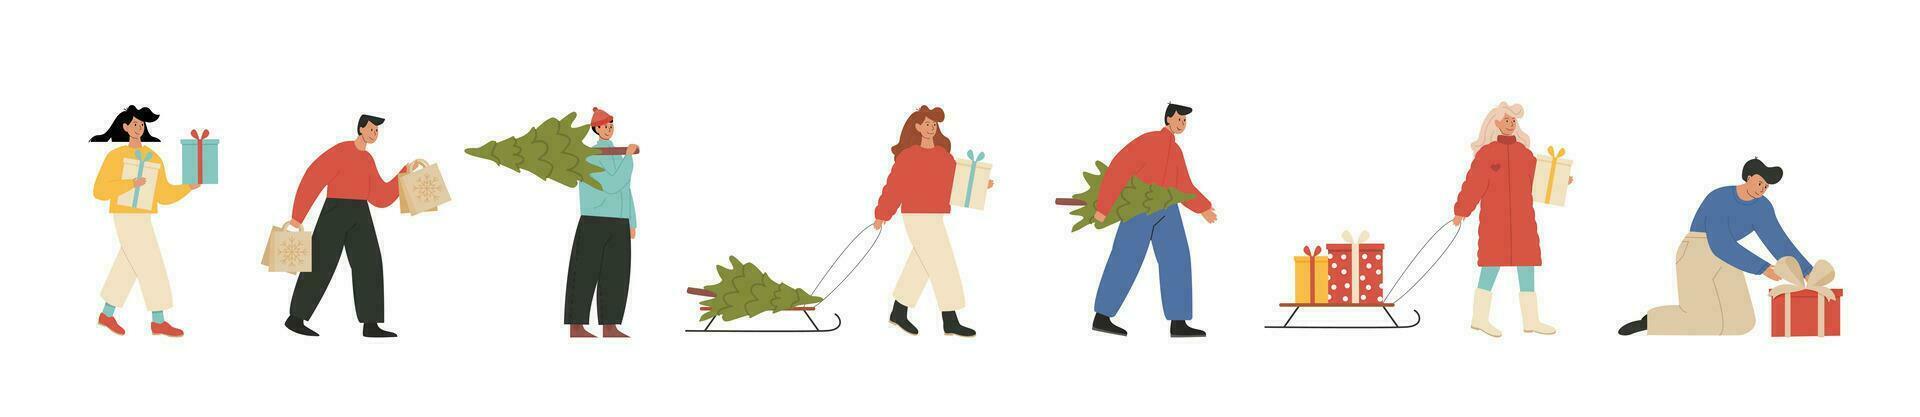 Big set of happy merry people wearing face mask, walking carrying wrapped gift boxes and sled with Christmas tree. Men and women preparing presents for Xmas and New year. Vector illustration.